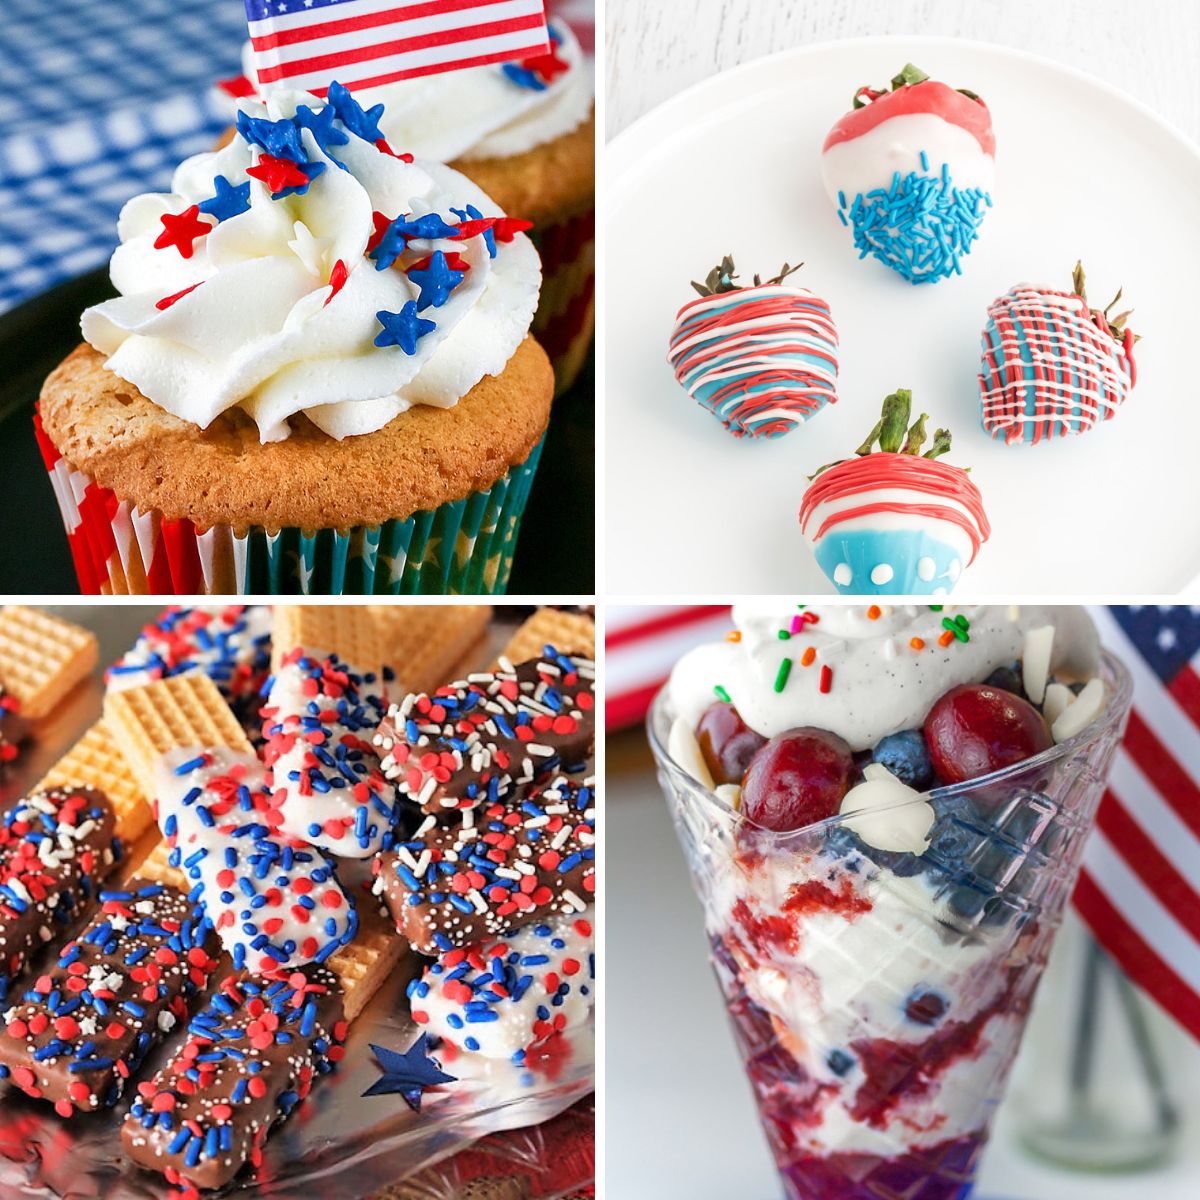 Collection of 10 of the Best 4th of July Chocolate Treats compiled by Jane Bonacci, The Heritage Cook.